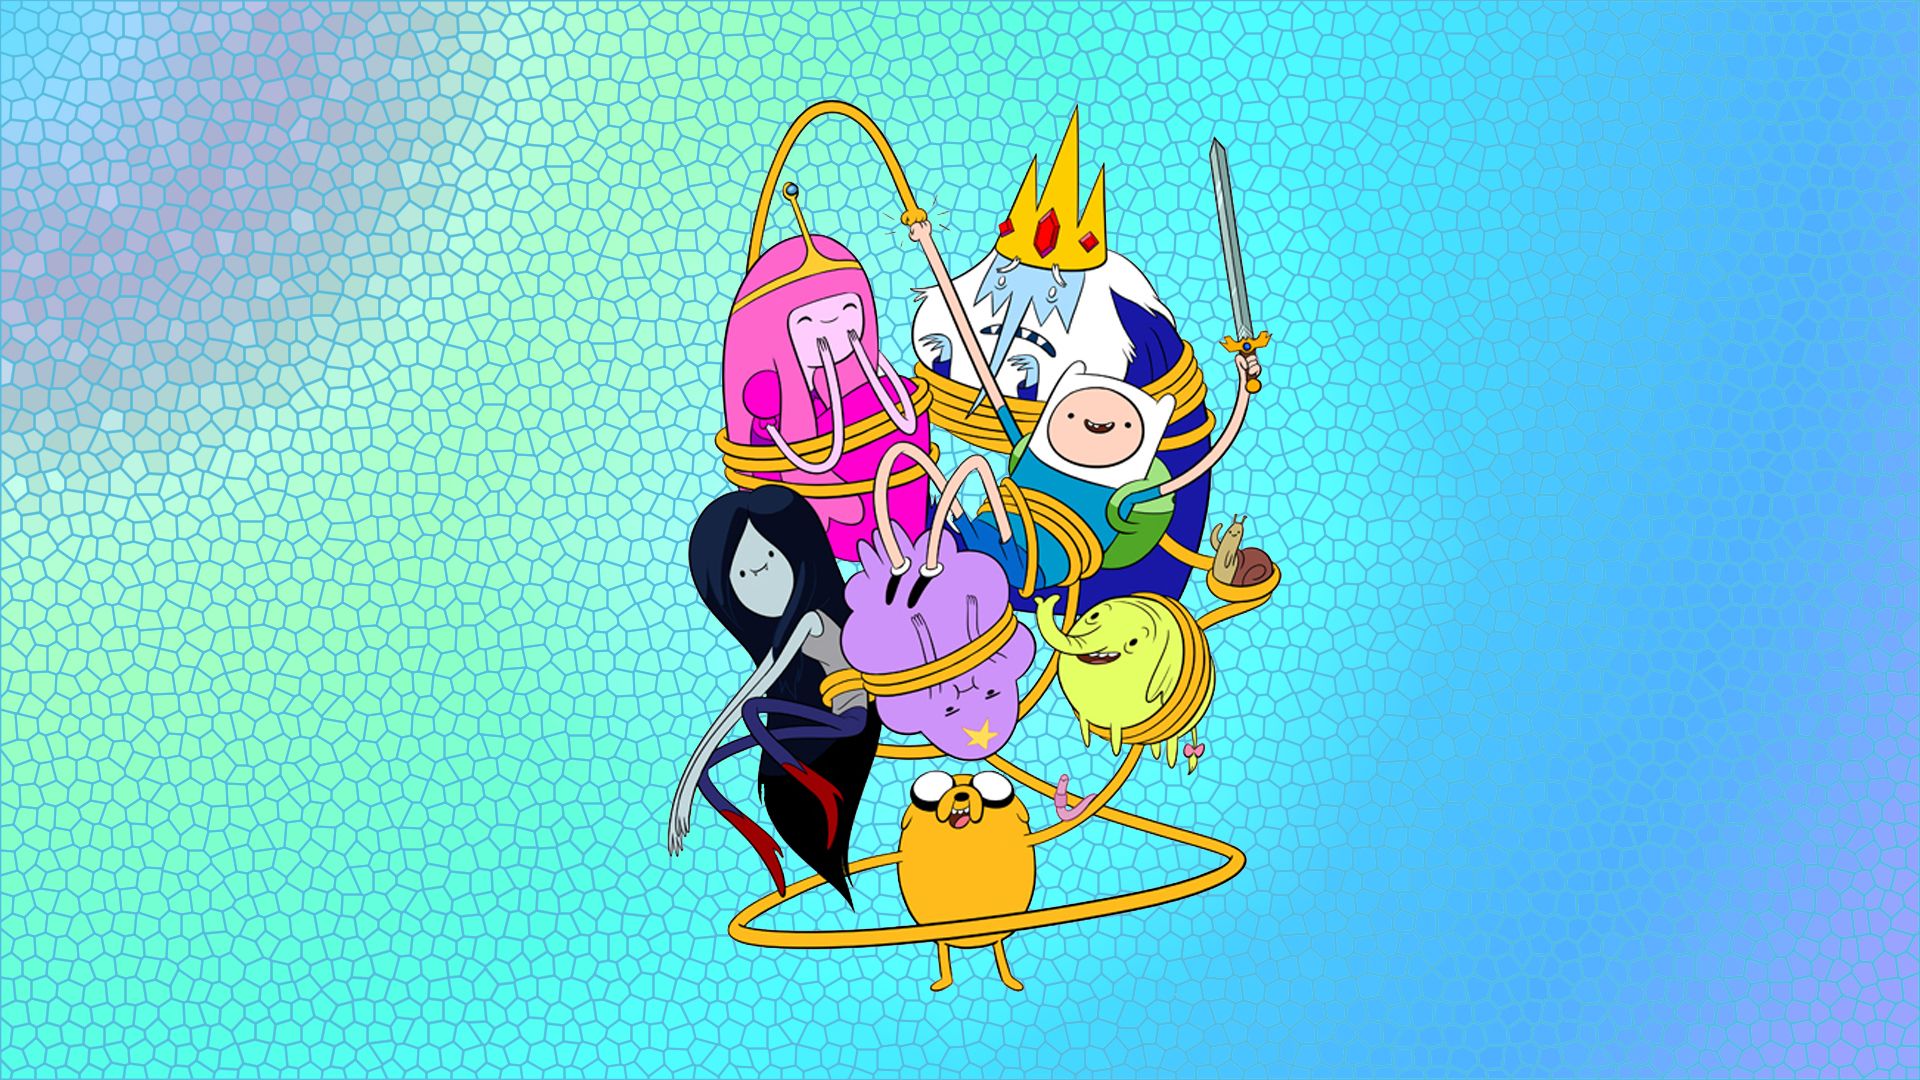 Adventure Time Wallpapers Download Free | Wallpapers, Backgrounds ...